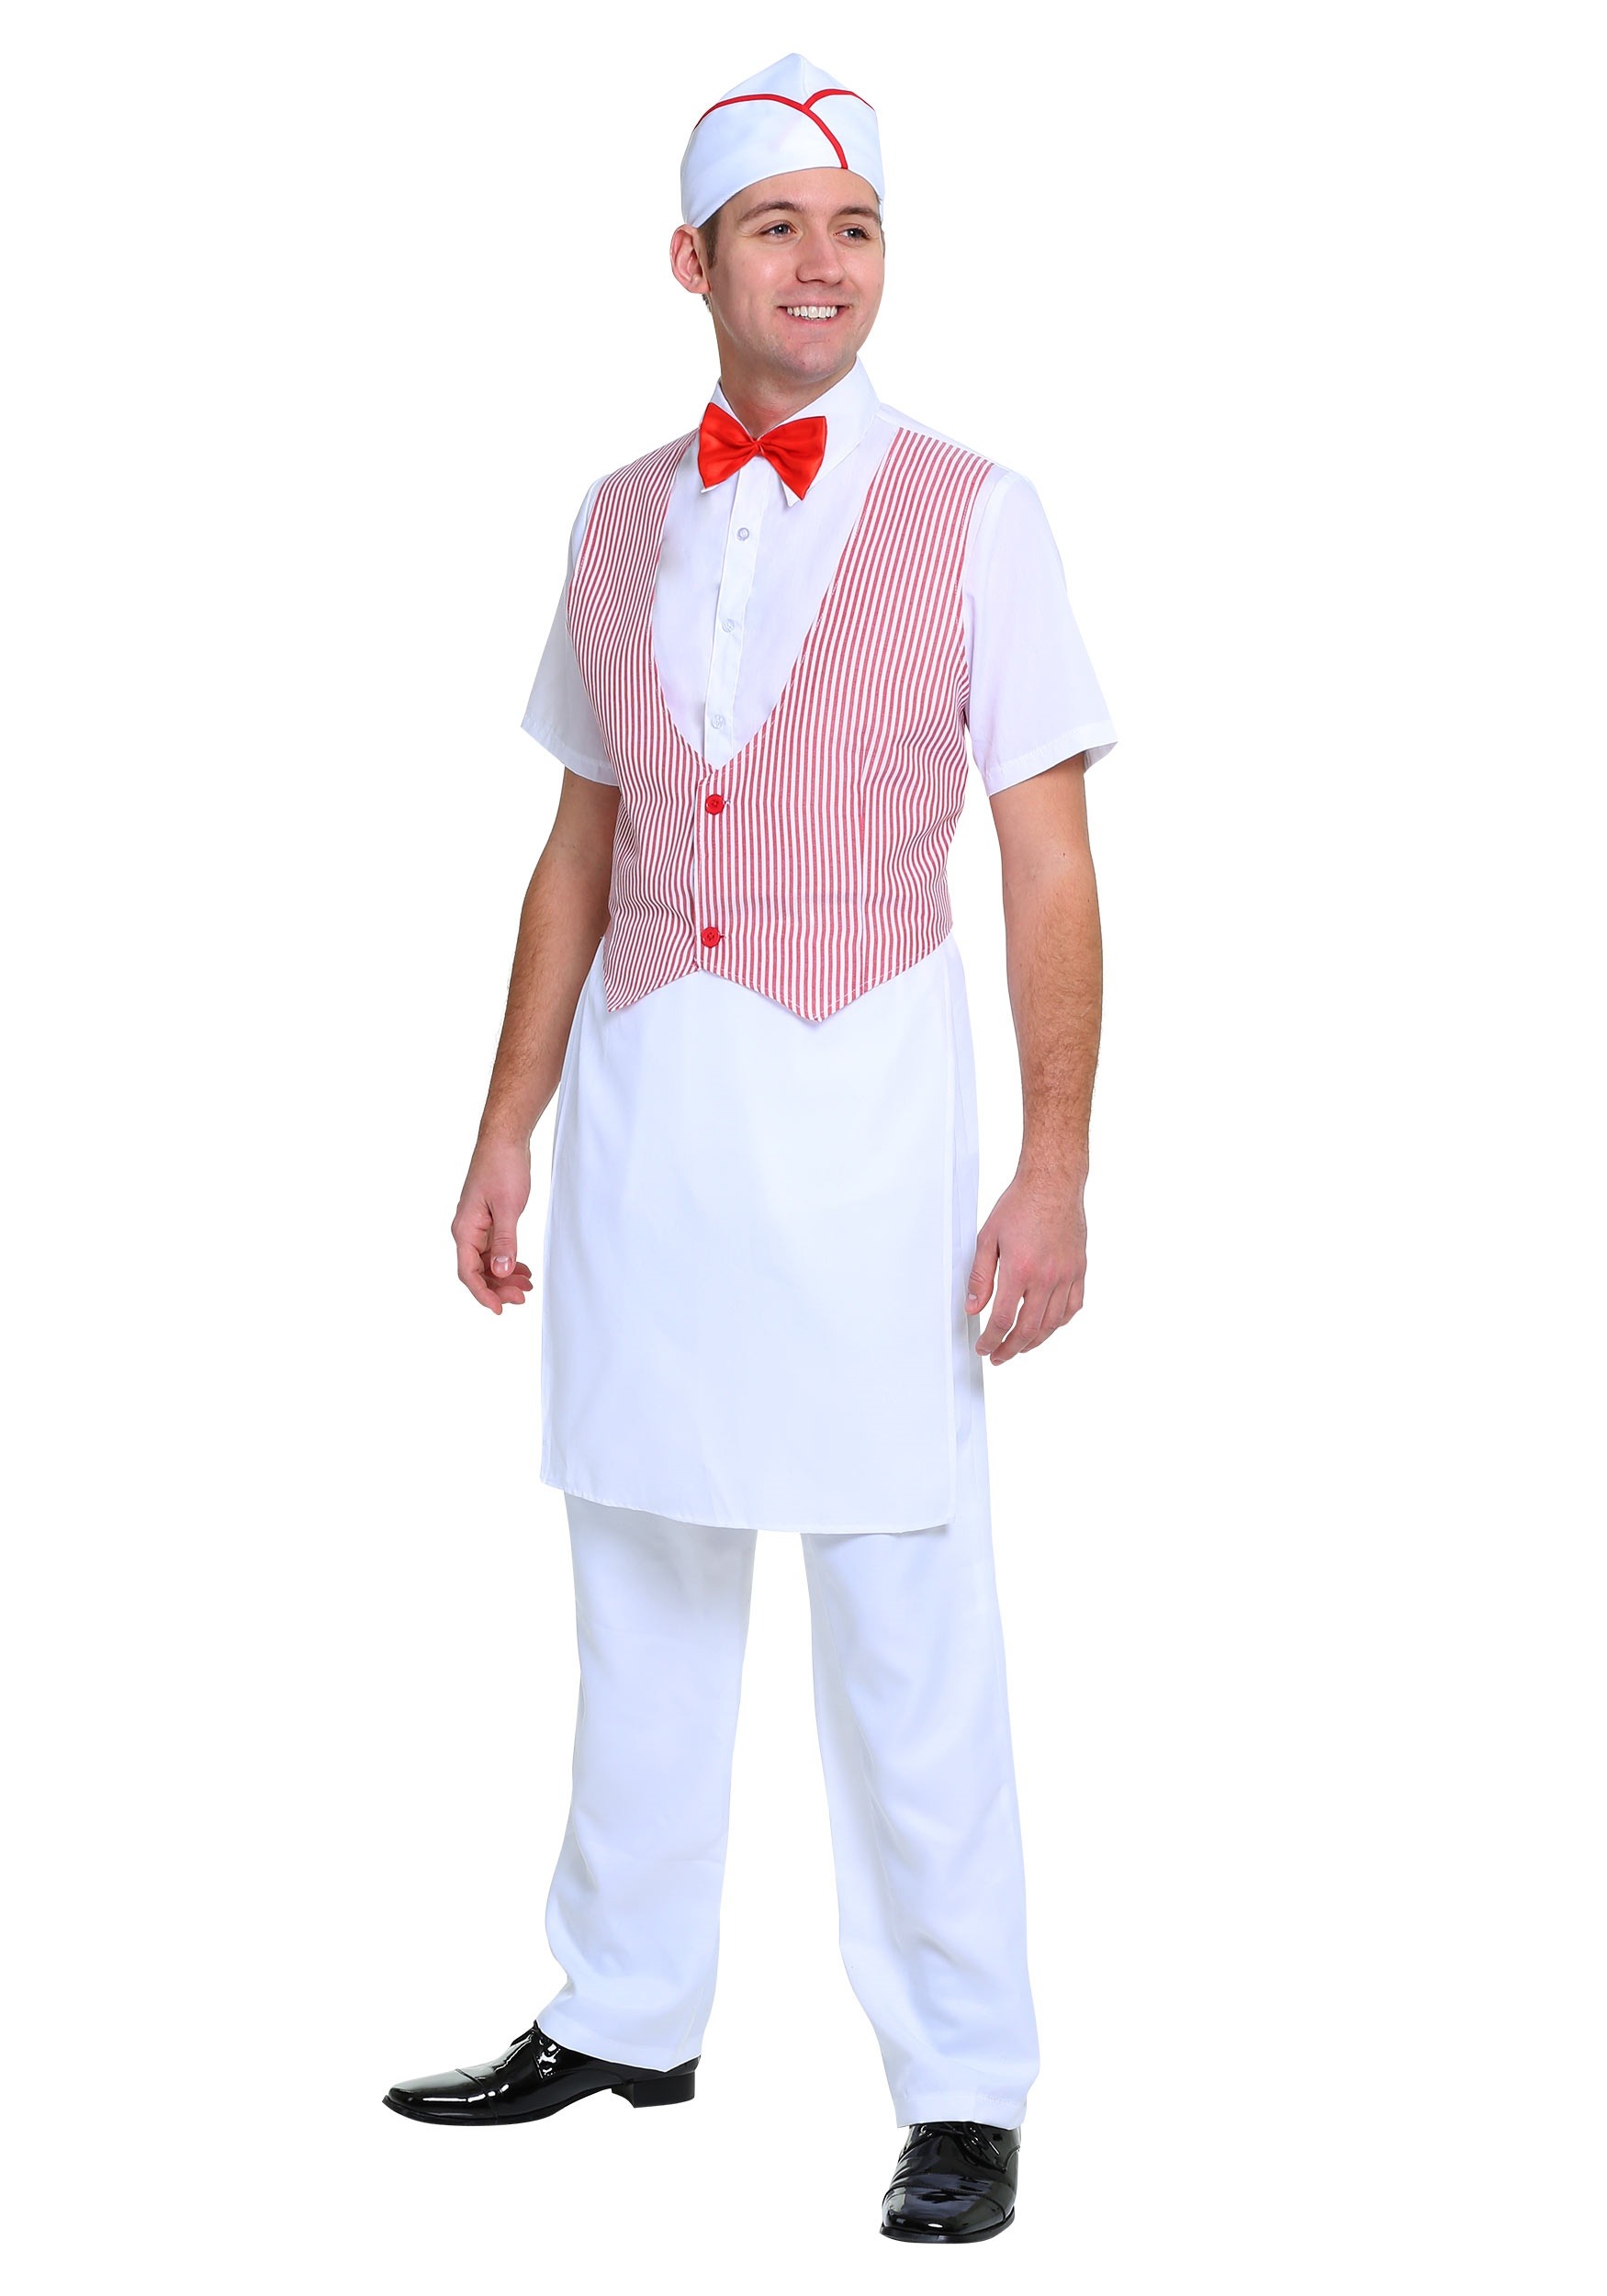 Photos - Fancy Dress FUN Costumes Adult 50's Car Hop Costume | Decade Halloween Costumes Red